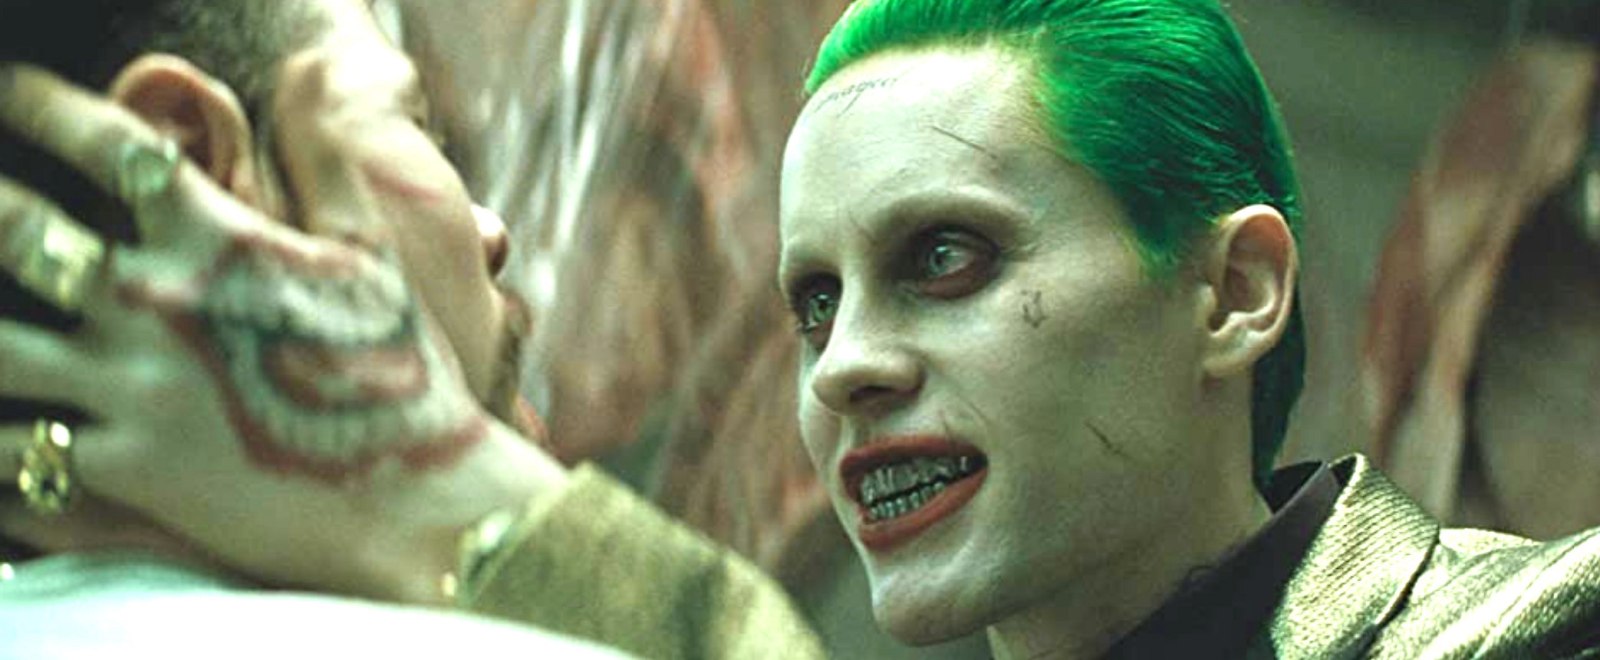 Zack Snyder Gives More Clues About Jared Leto’s Very Different Joker For His ‘Justice League’ Director’s Cut